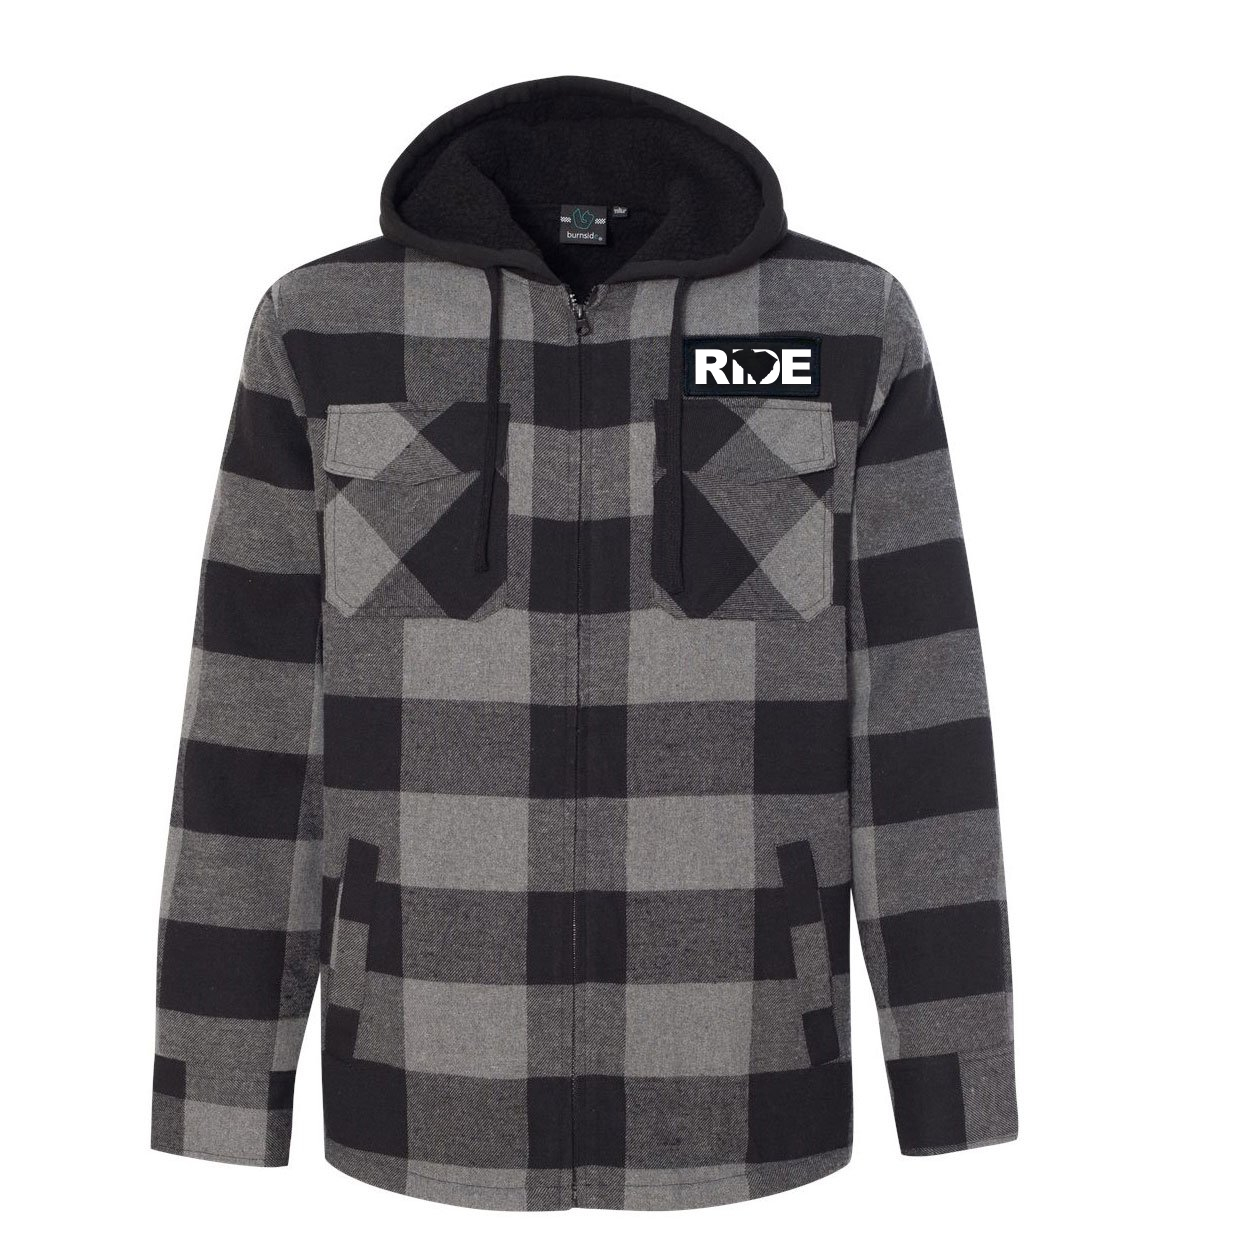 Ride South Carolina Classic Unisex Full Zip Woven Patch Hooded Flannel Jacket Black/Gray (White Logo)